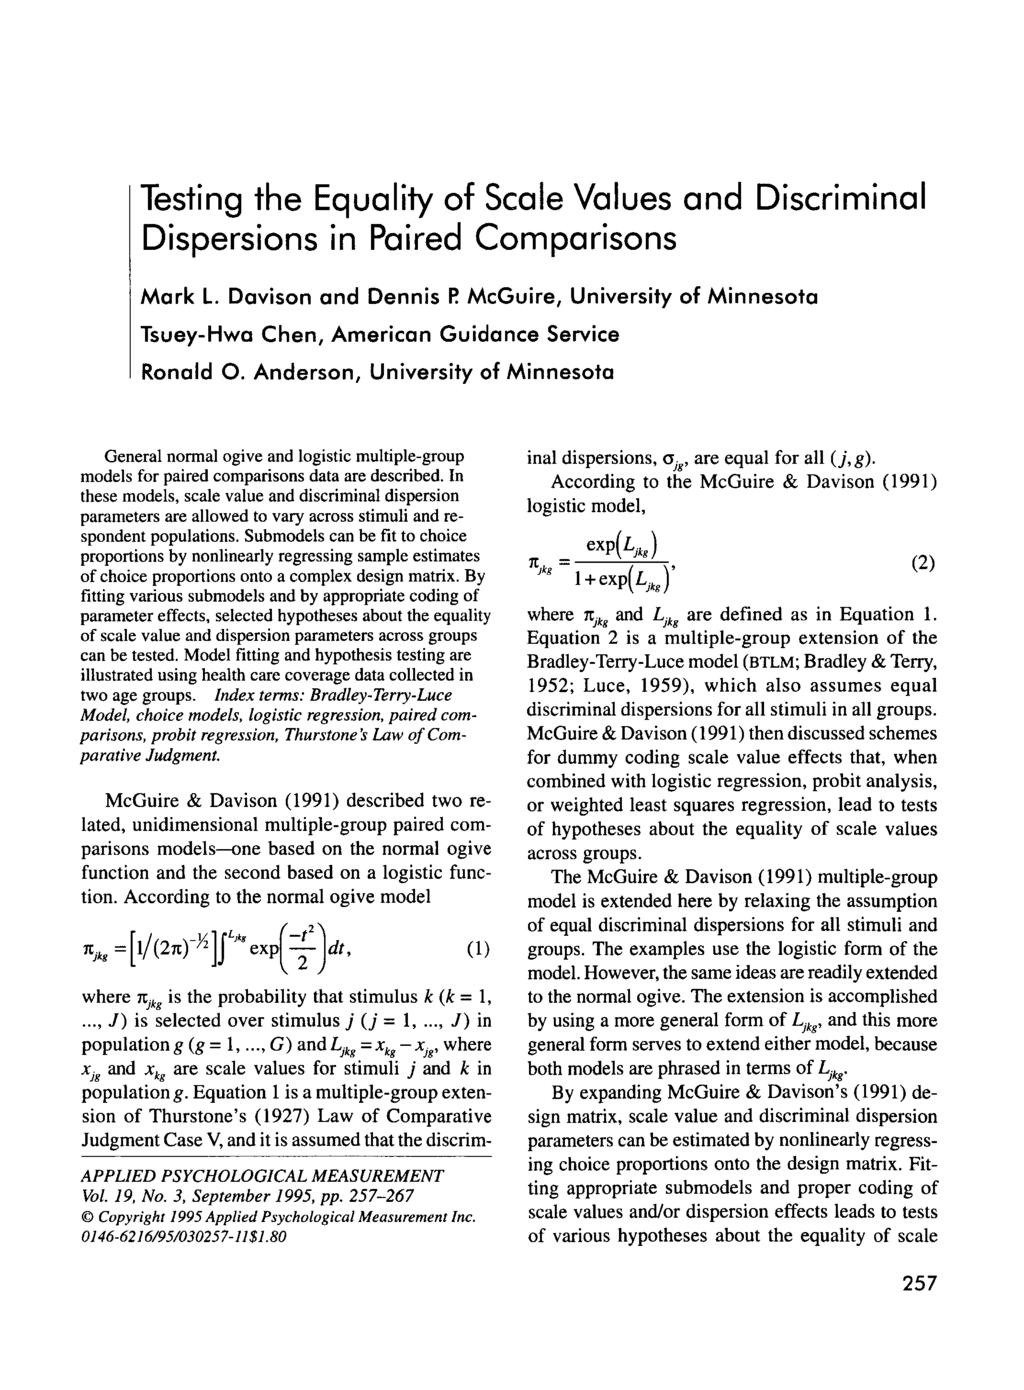 Testing the Equality of Scale Values and Discriminal Dispersions in Paired Comparisons Mark L. Davison and Dennis P.